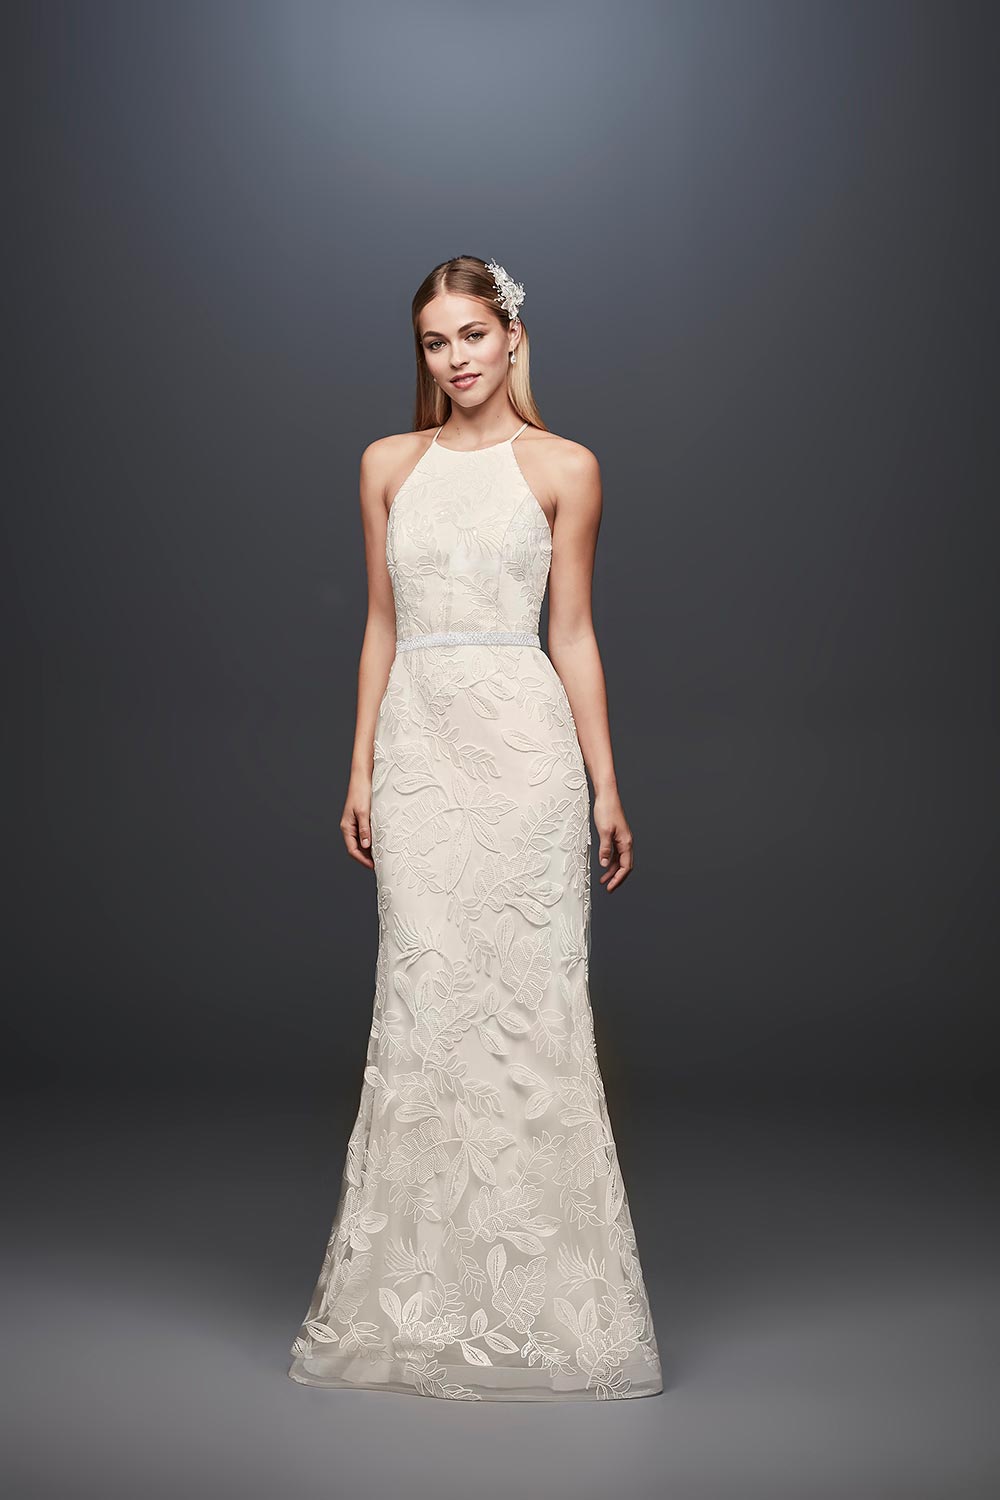 These Wedding Dresses are Under $300 ...